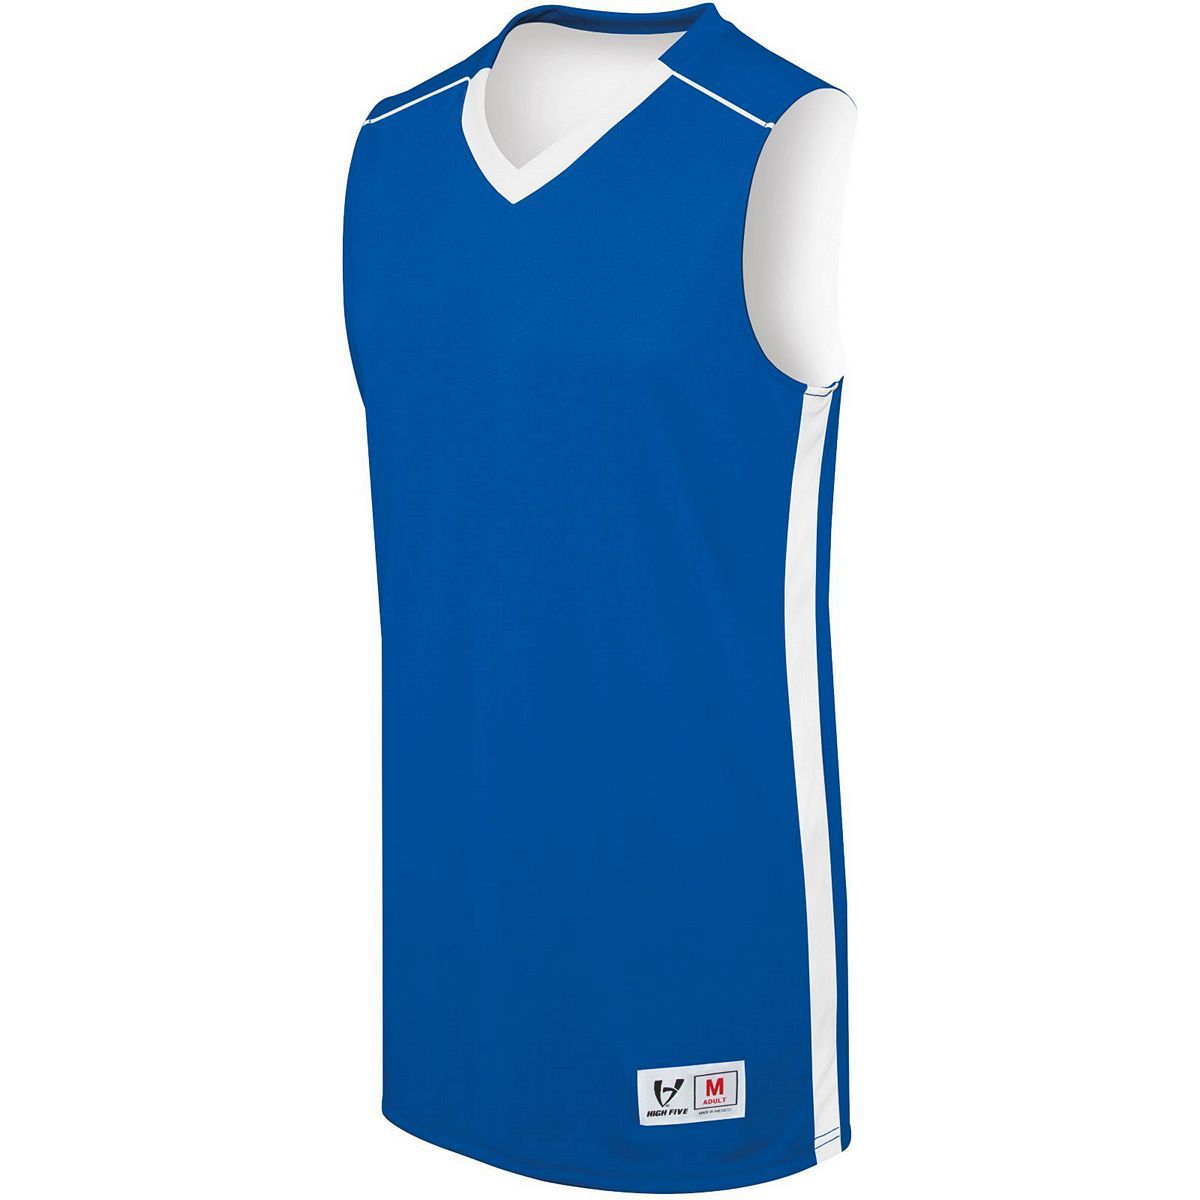 Augusta Sportswear Youth Competition Reversible Jersey in Royal/White  -Part of the Youth, Youth-Jersey, Augusta-Products, Basketball, Shirts, All-Sports, All-Sports-1 product lines at KanaleyCreations.com